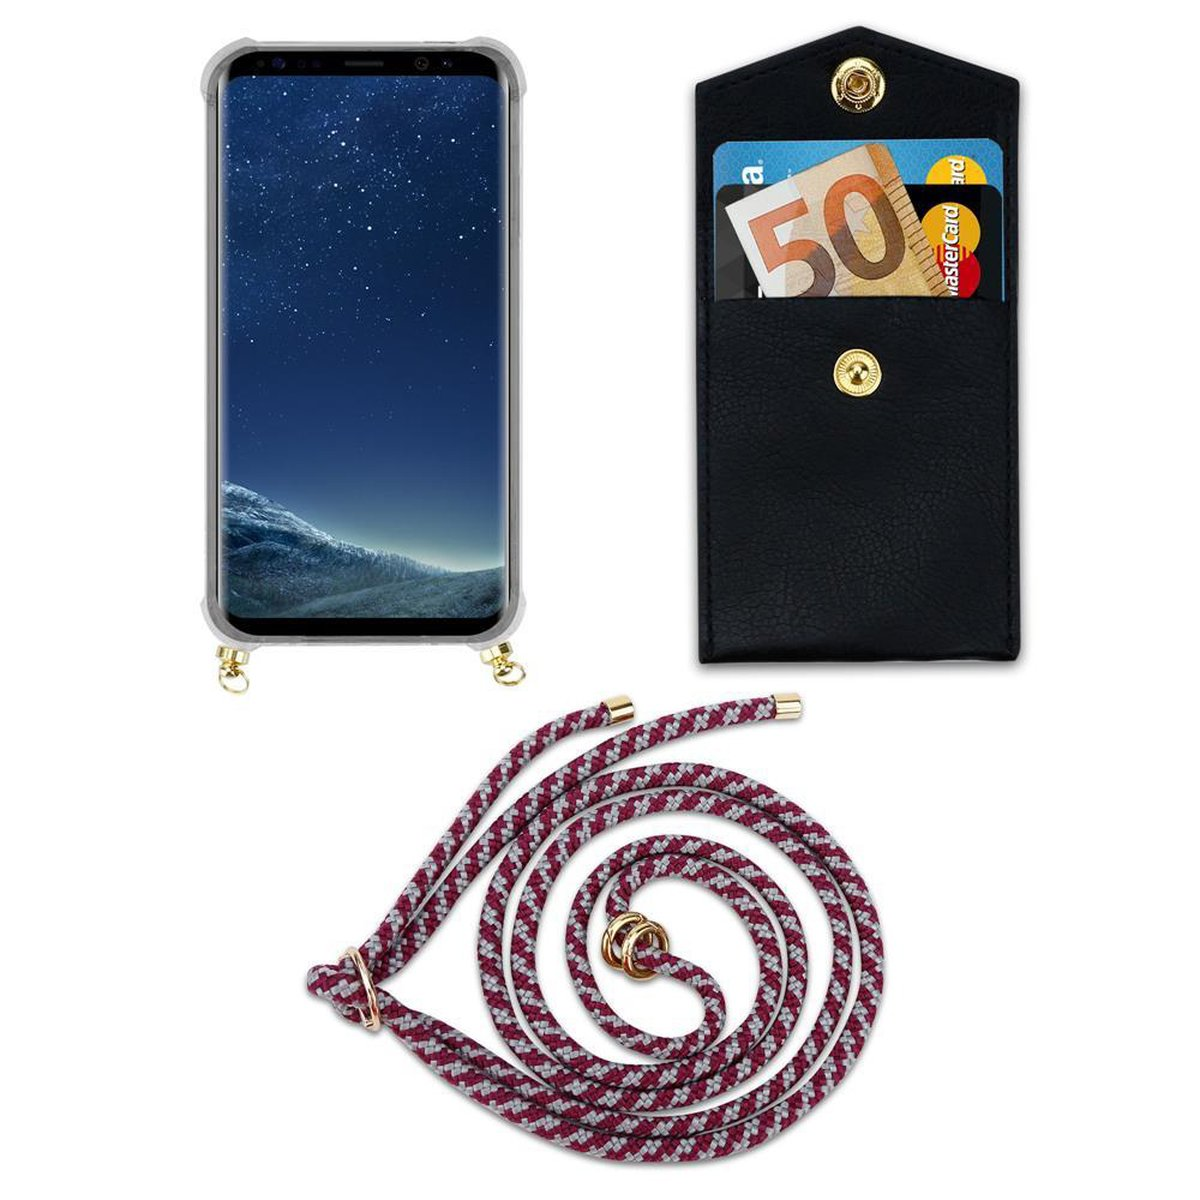 CADORABO Handy Kette mit und Backcover, WEIß S8 Hülle, Ringen, Samsung, PLUS, Gold Galaxy Band ROT abnehmbarer Kordel